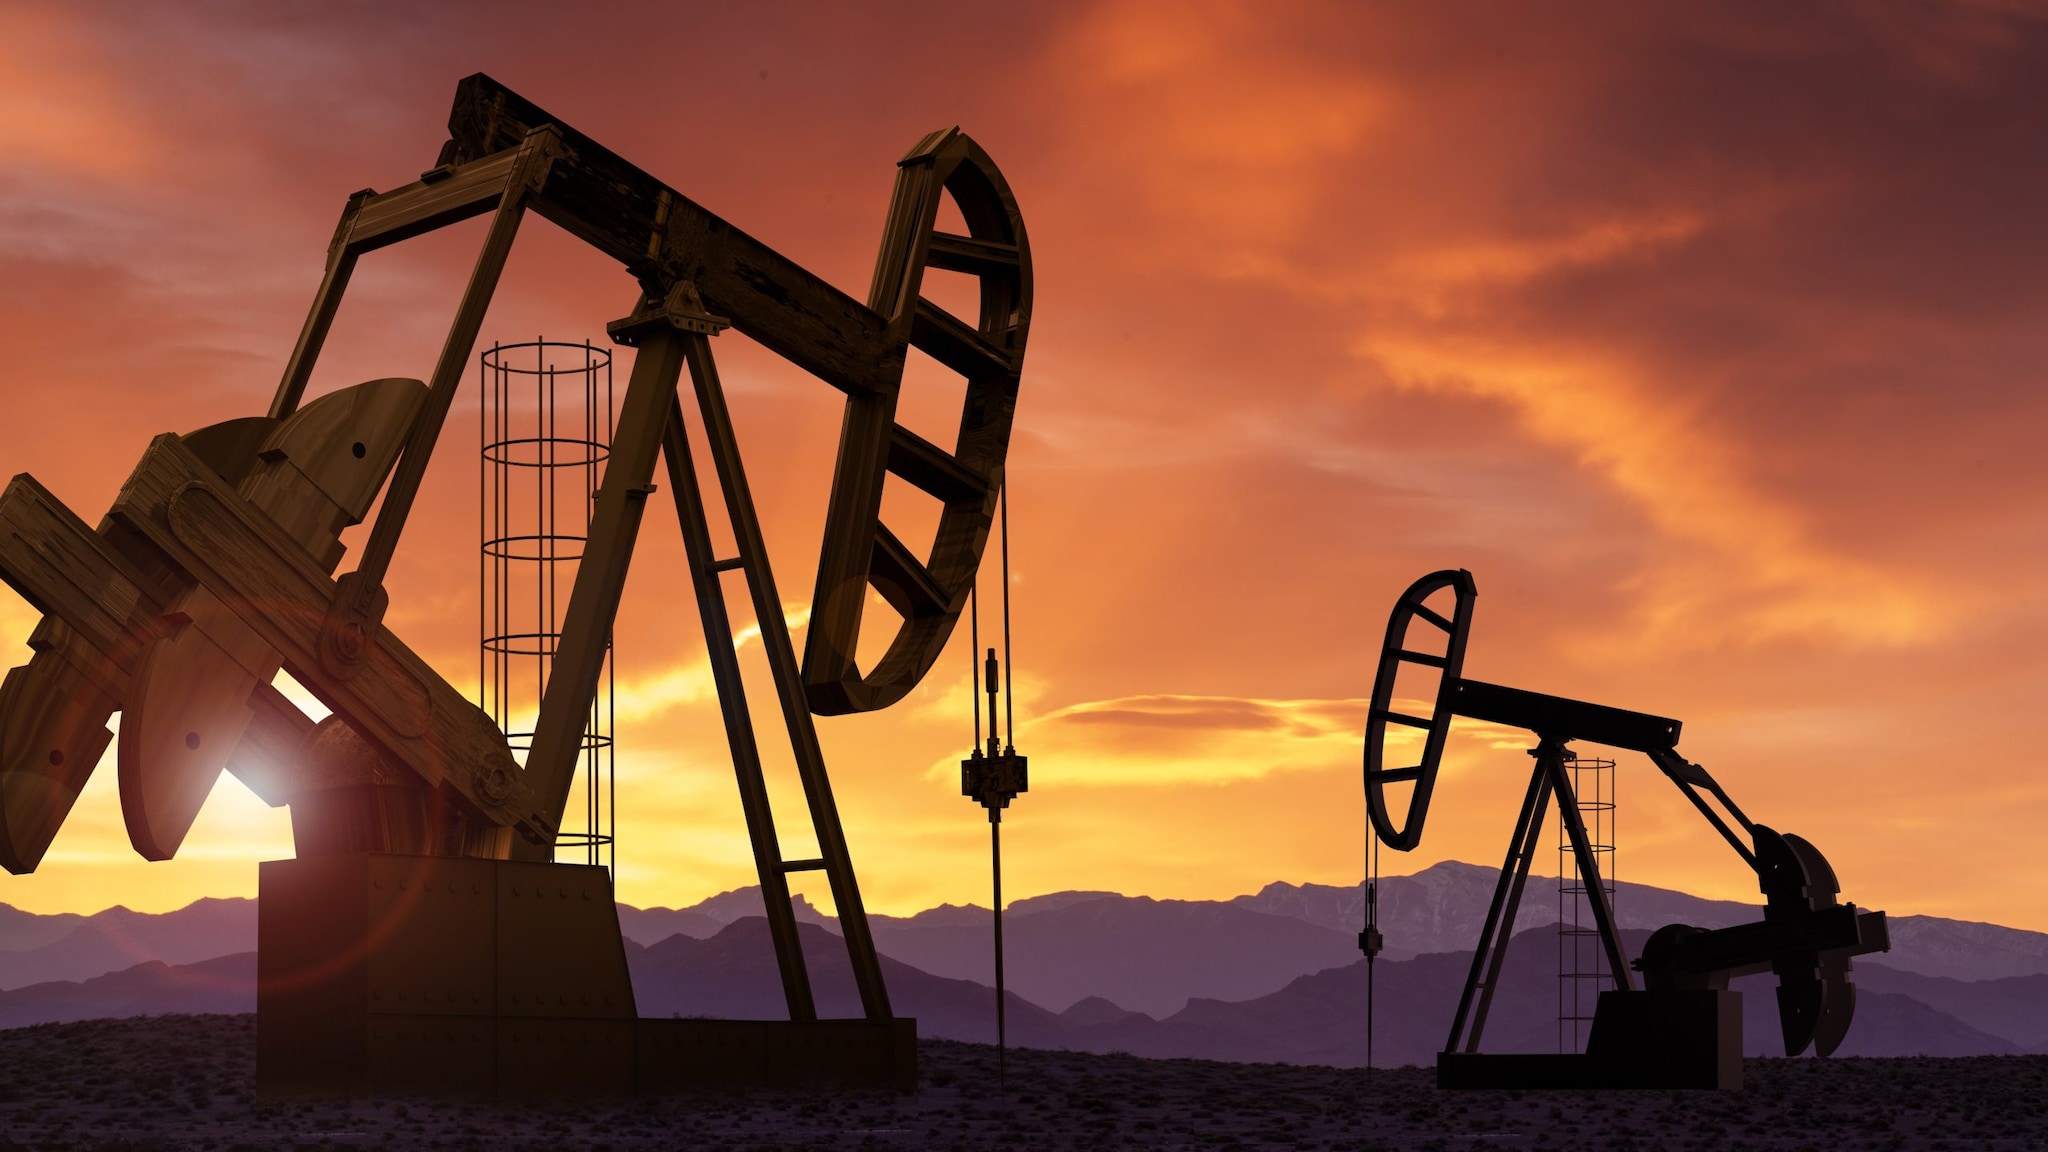 Oil pumps at sunset.